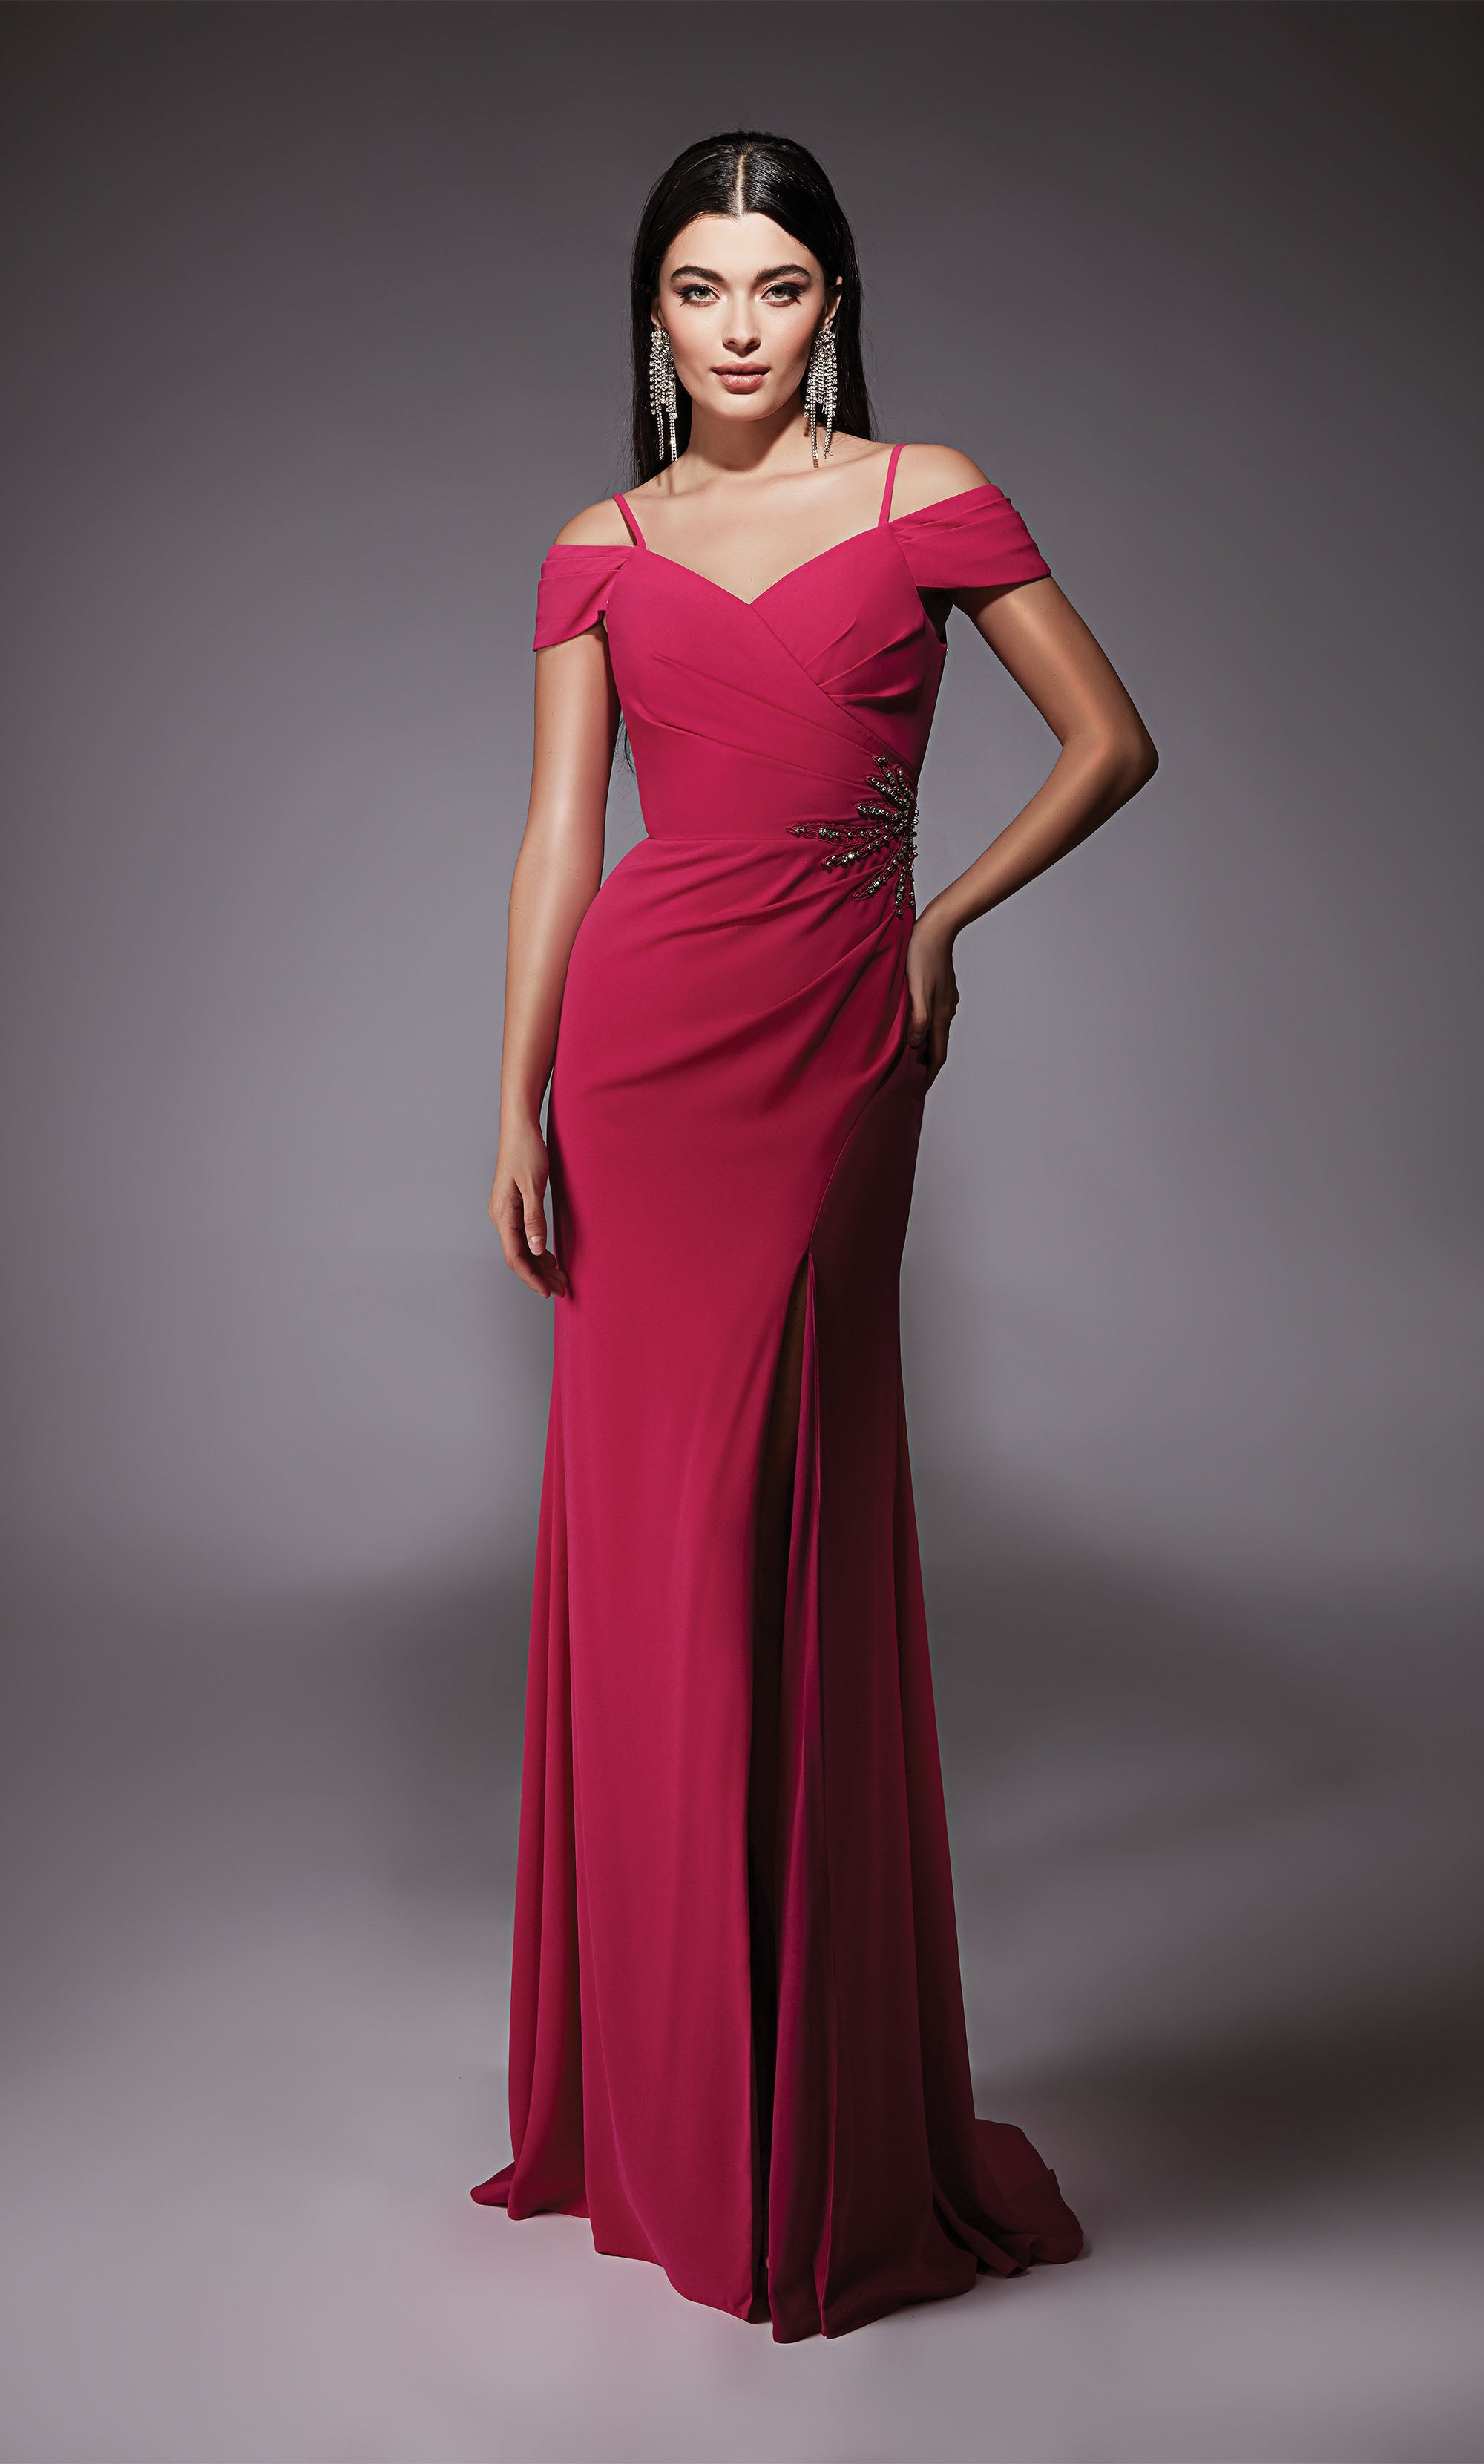 A hot pink, off-the-shoulder, mother-of-the-bride dress with adjustable spaghetti straps and a side slit. The back has a zip-up closure and a slight train.